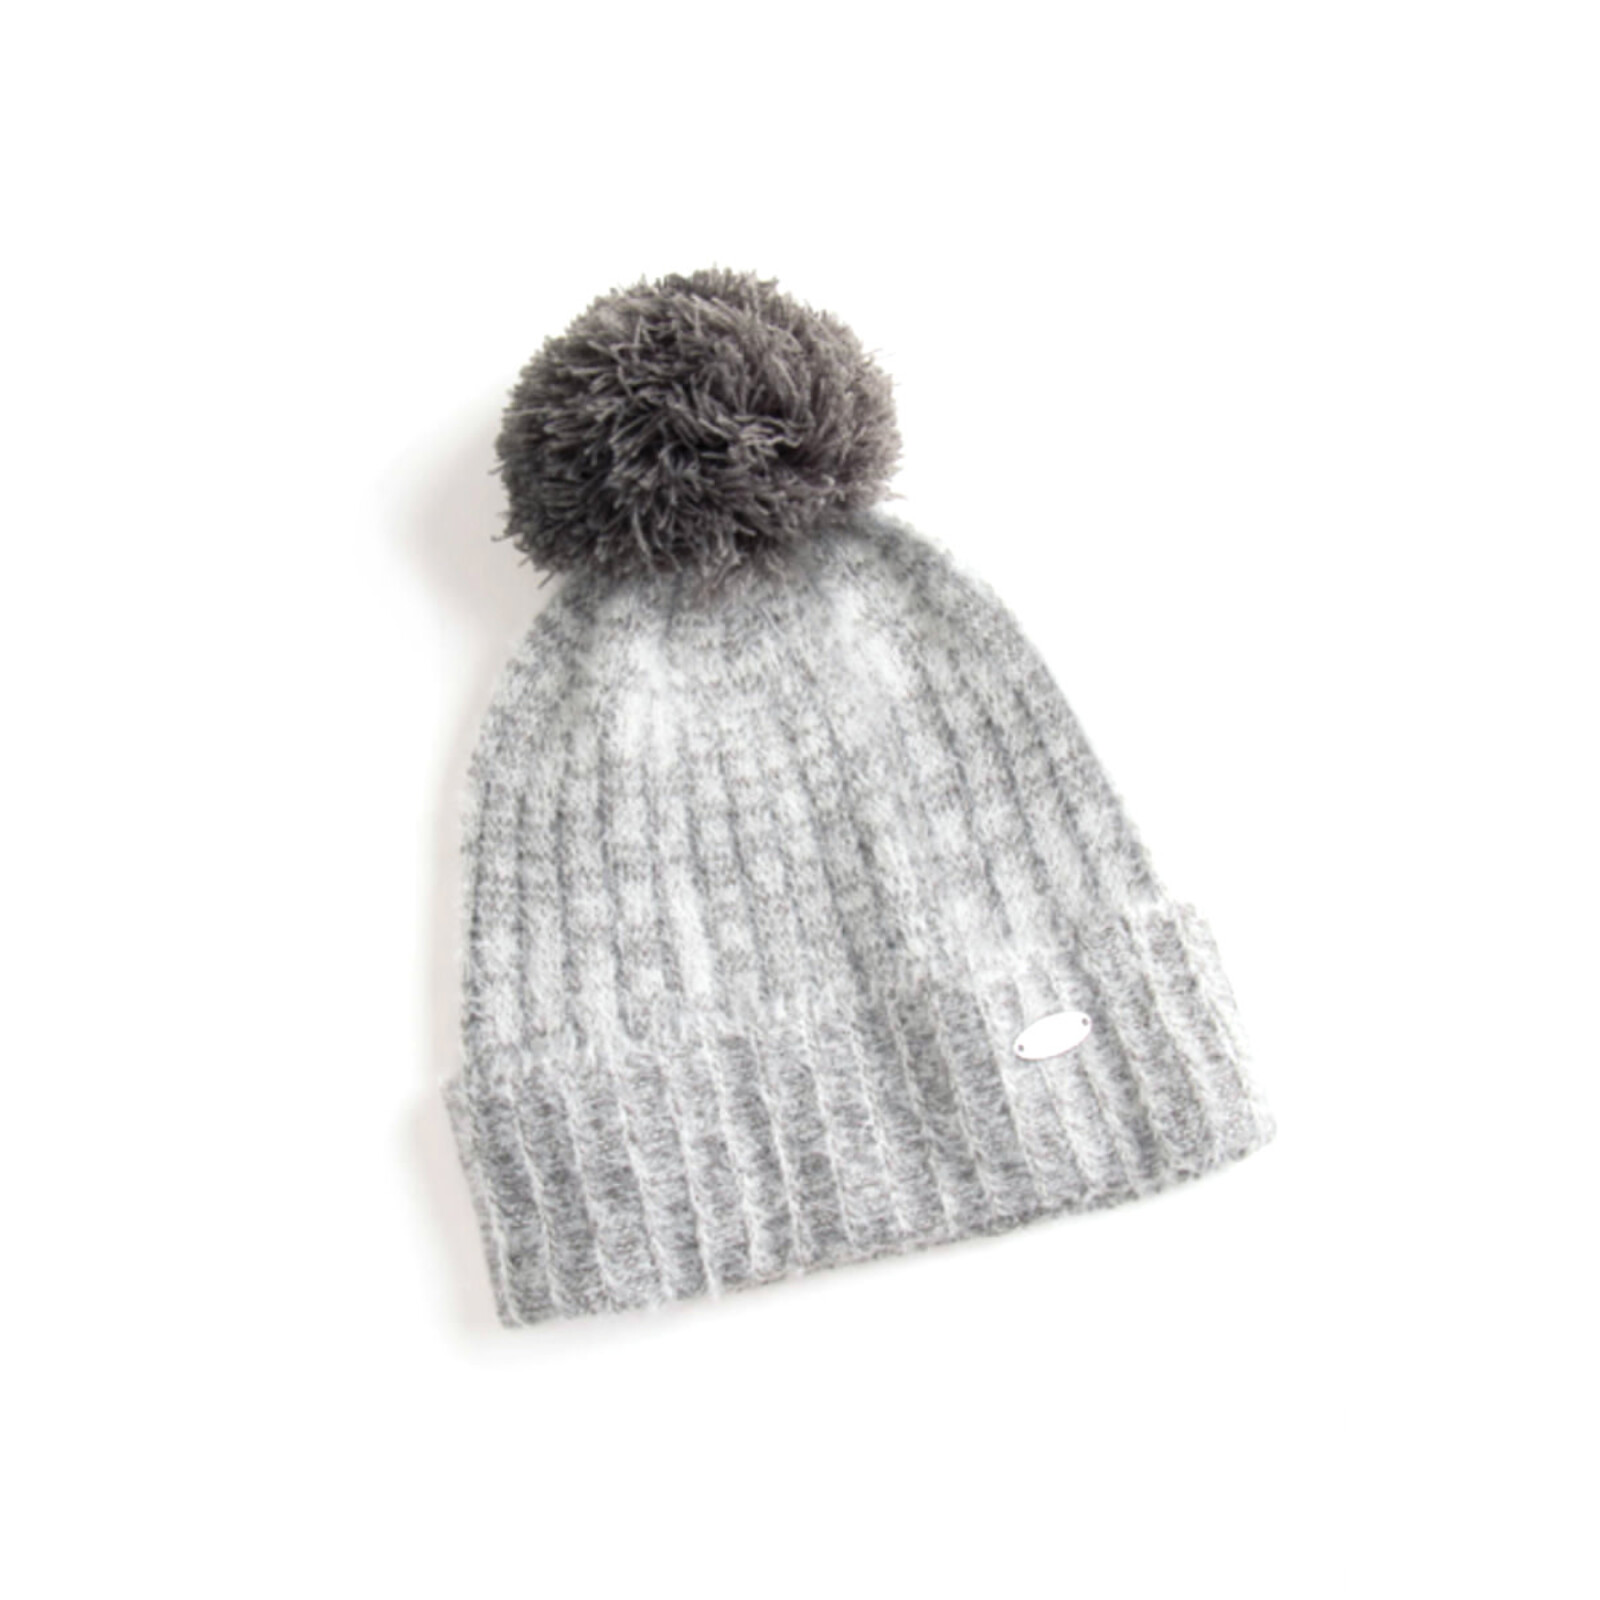 Simply Noelle Cold Snap Hat          HAT8104 loading=